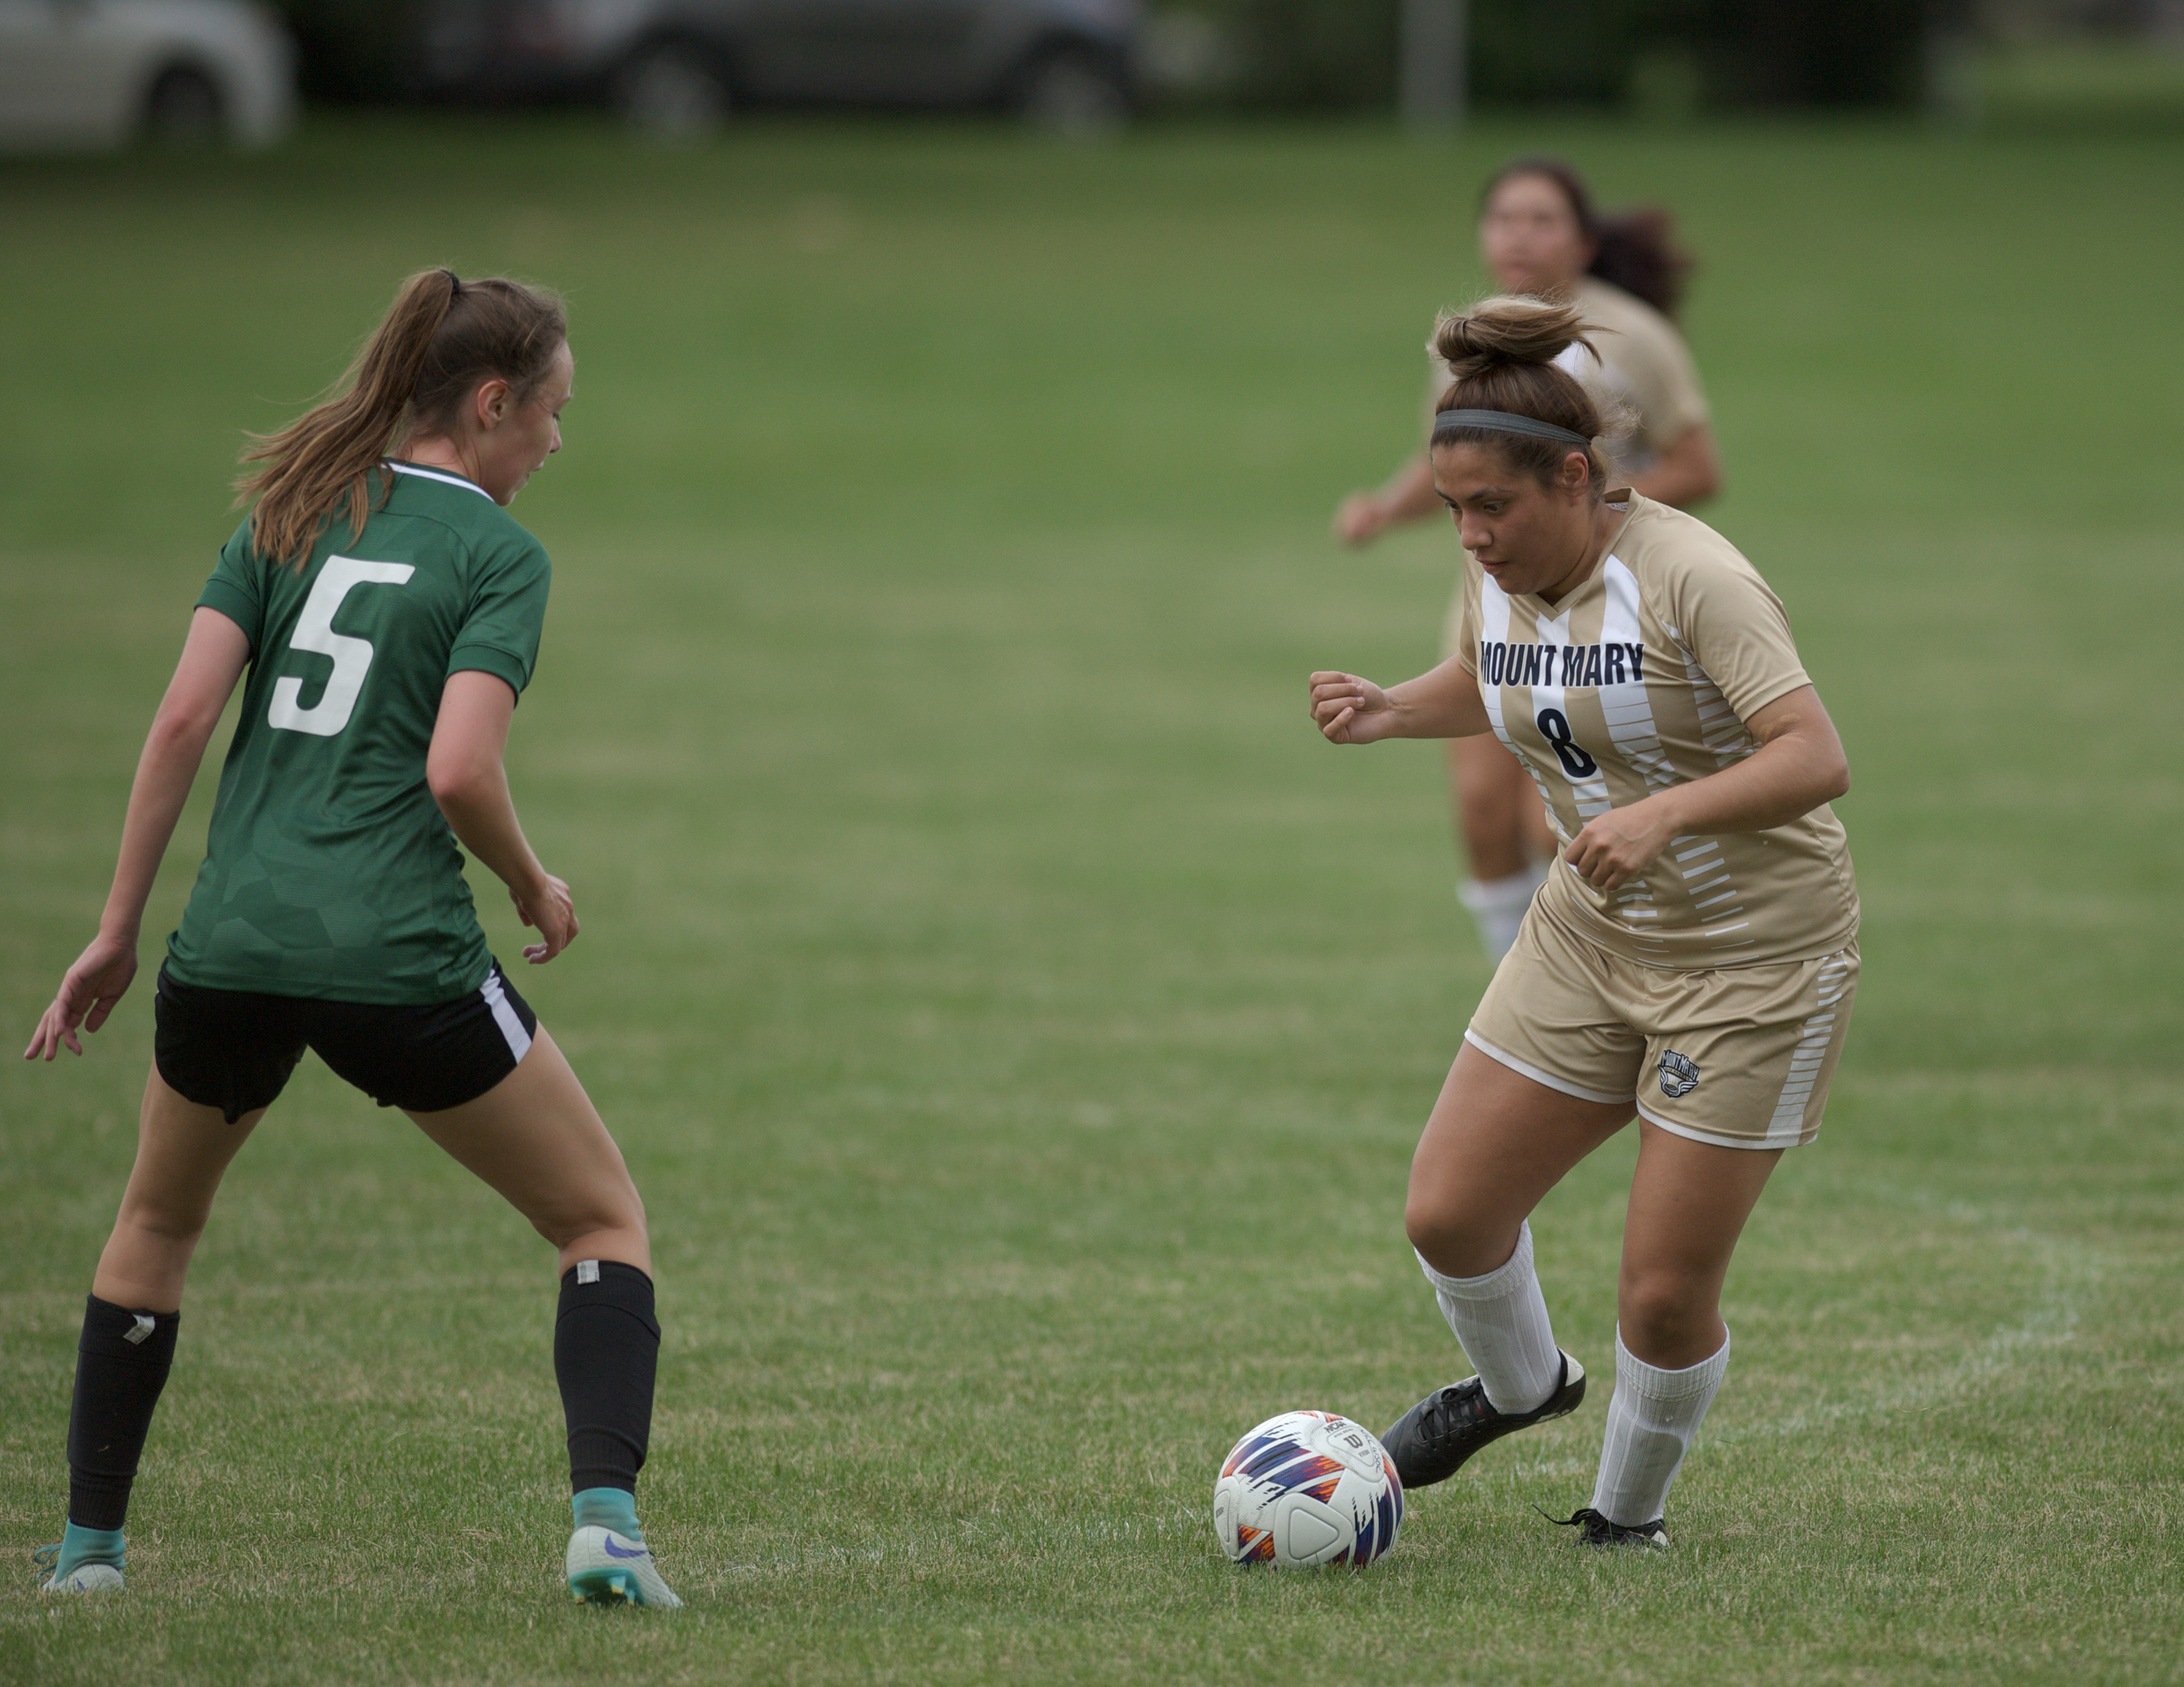 Reyes nets two goals as Mount Mary drops one goal result to Defiance